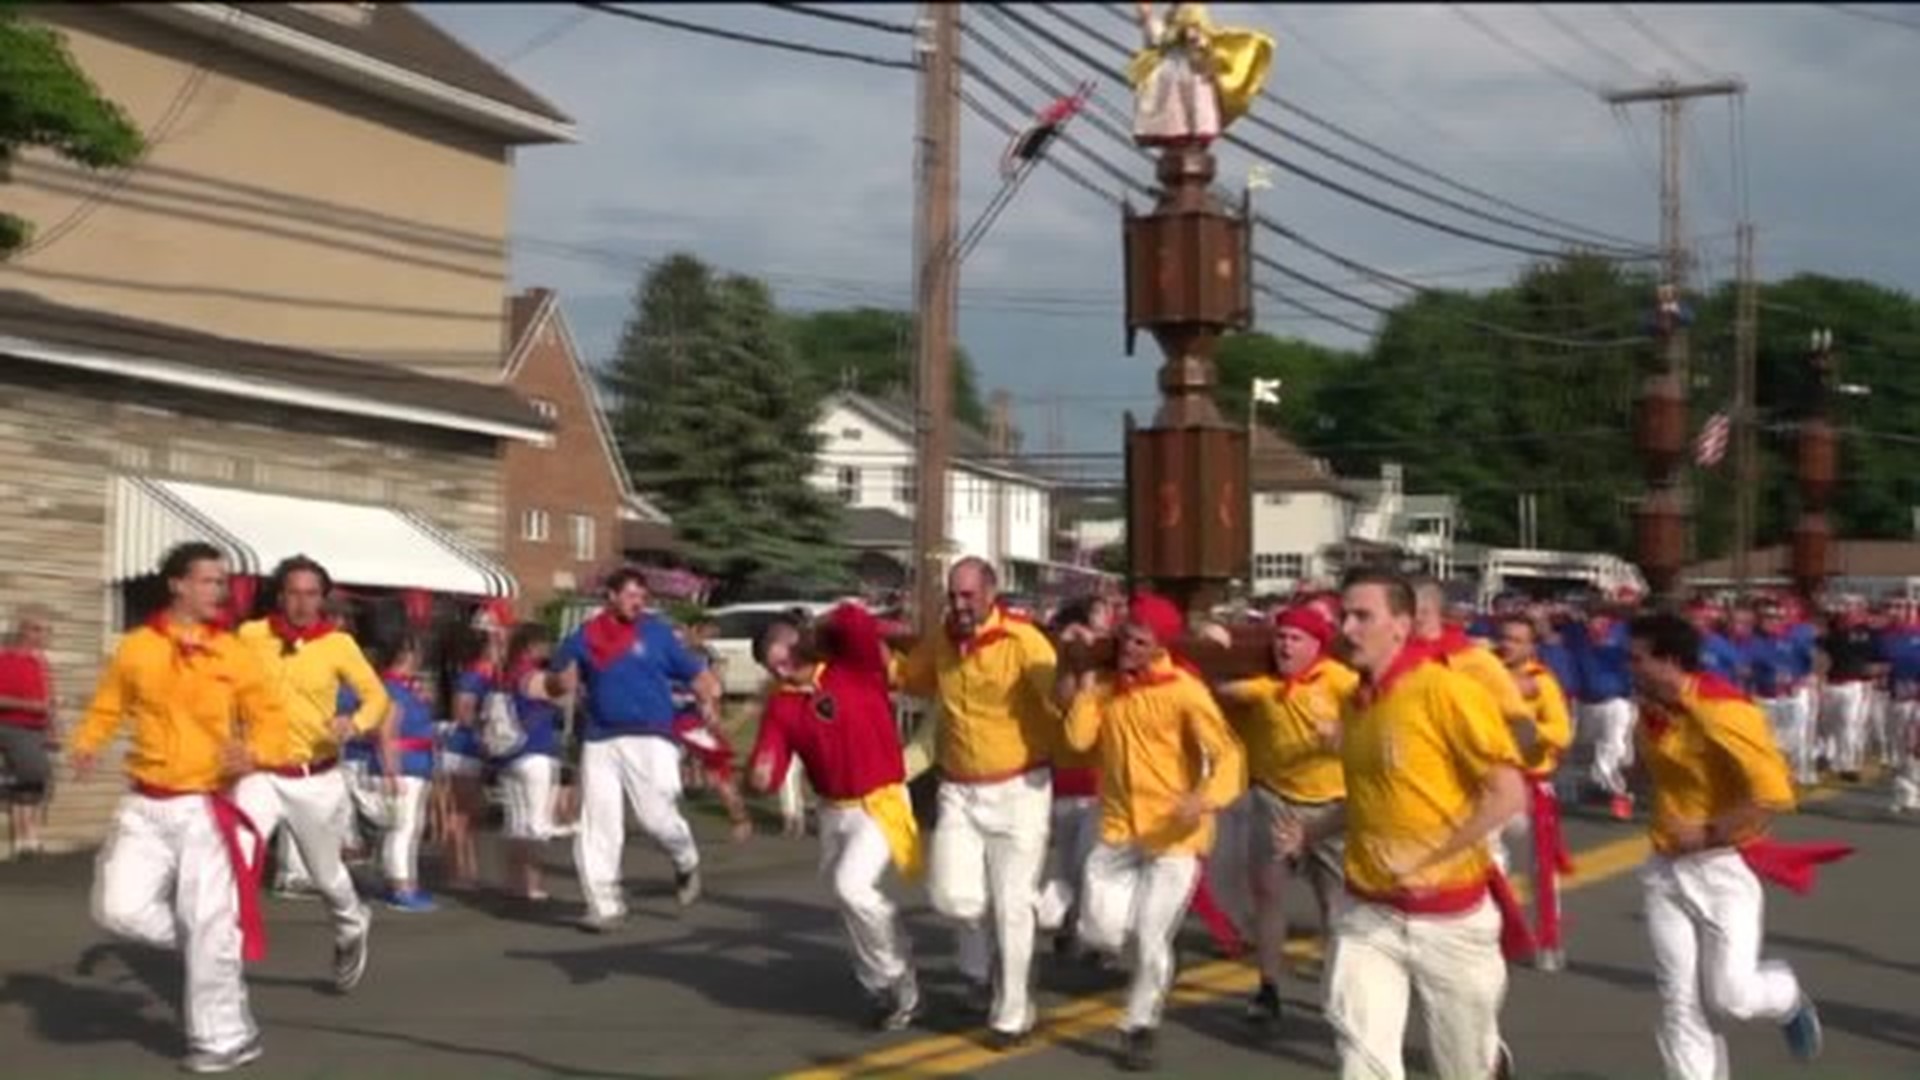 The running of the saints draws hundreds every year to Lackawanna County.